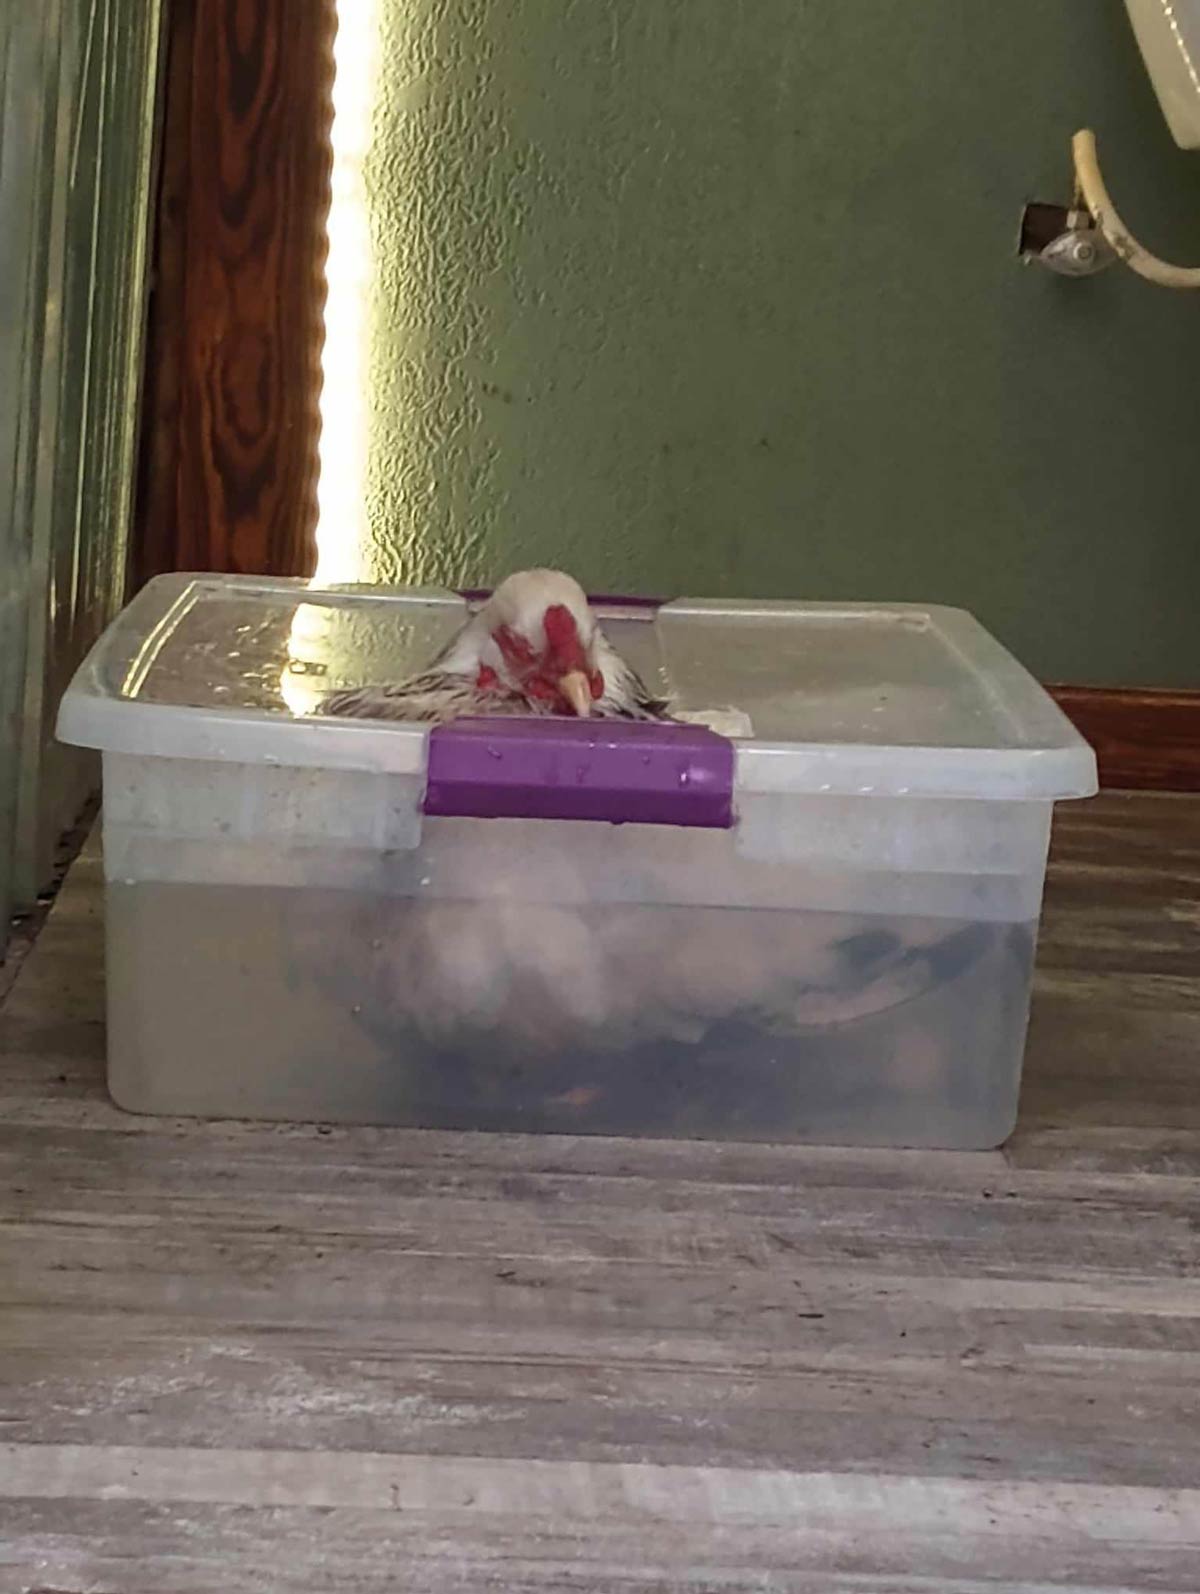 My friend's chicken likes to nap while soaking in her little hot tub